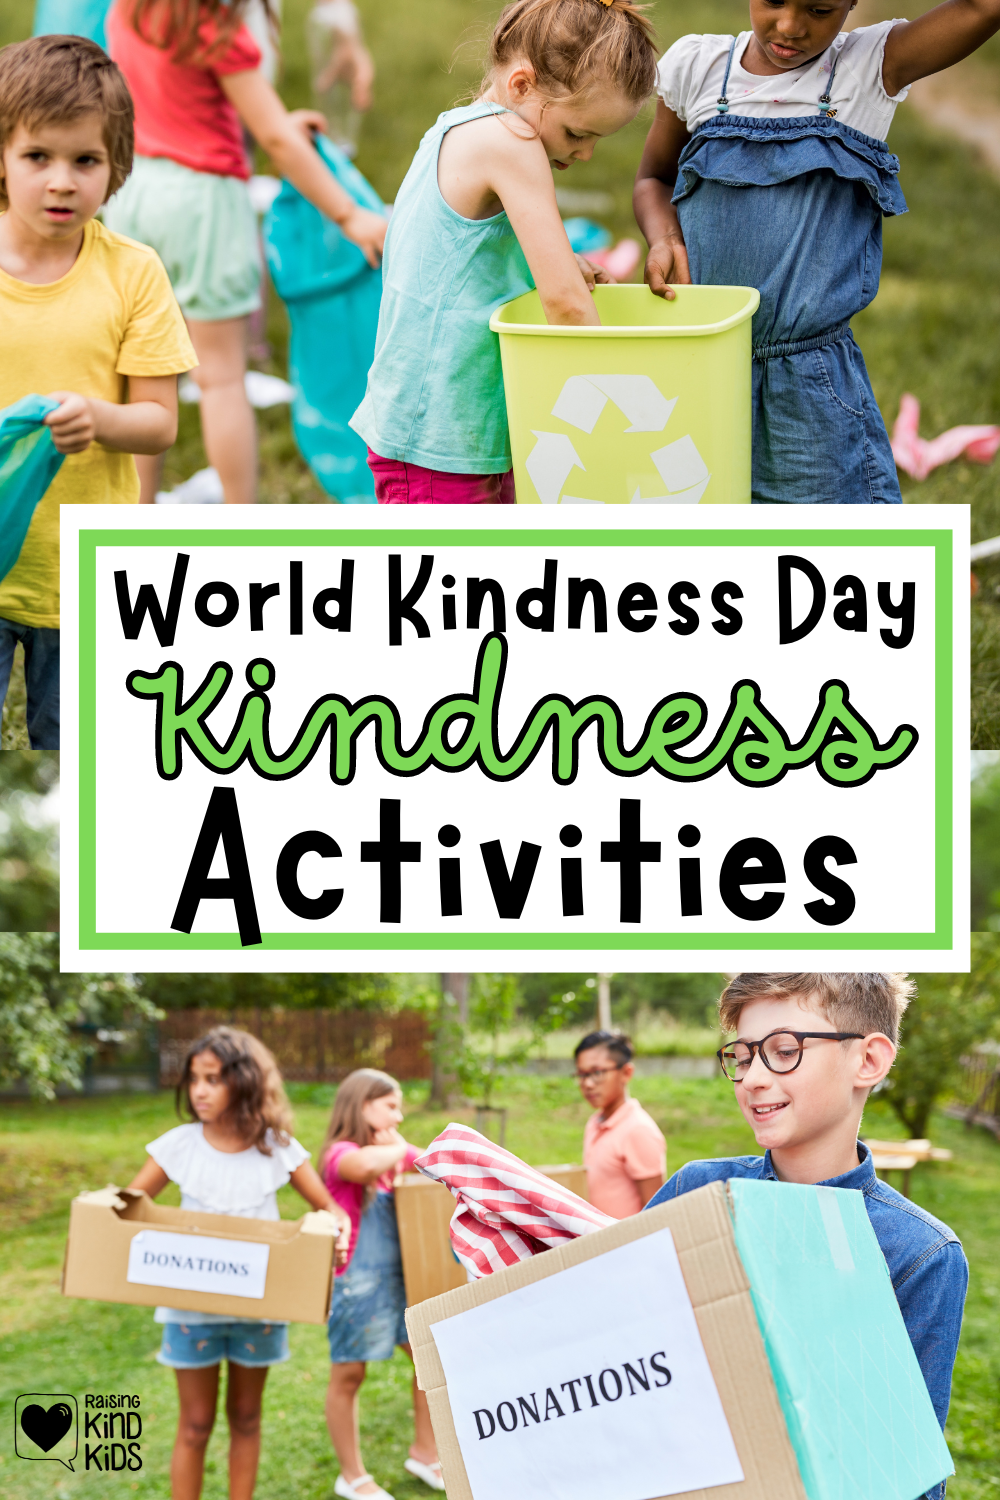 Use these 9 ideas for World Kindness Day Activities for Kids to spread more kindness to your community on November 13th each year. 